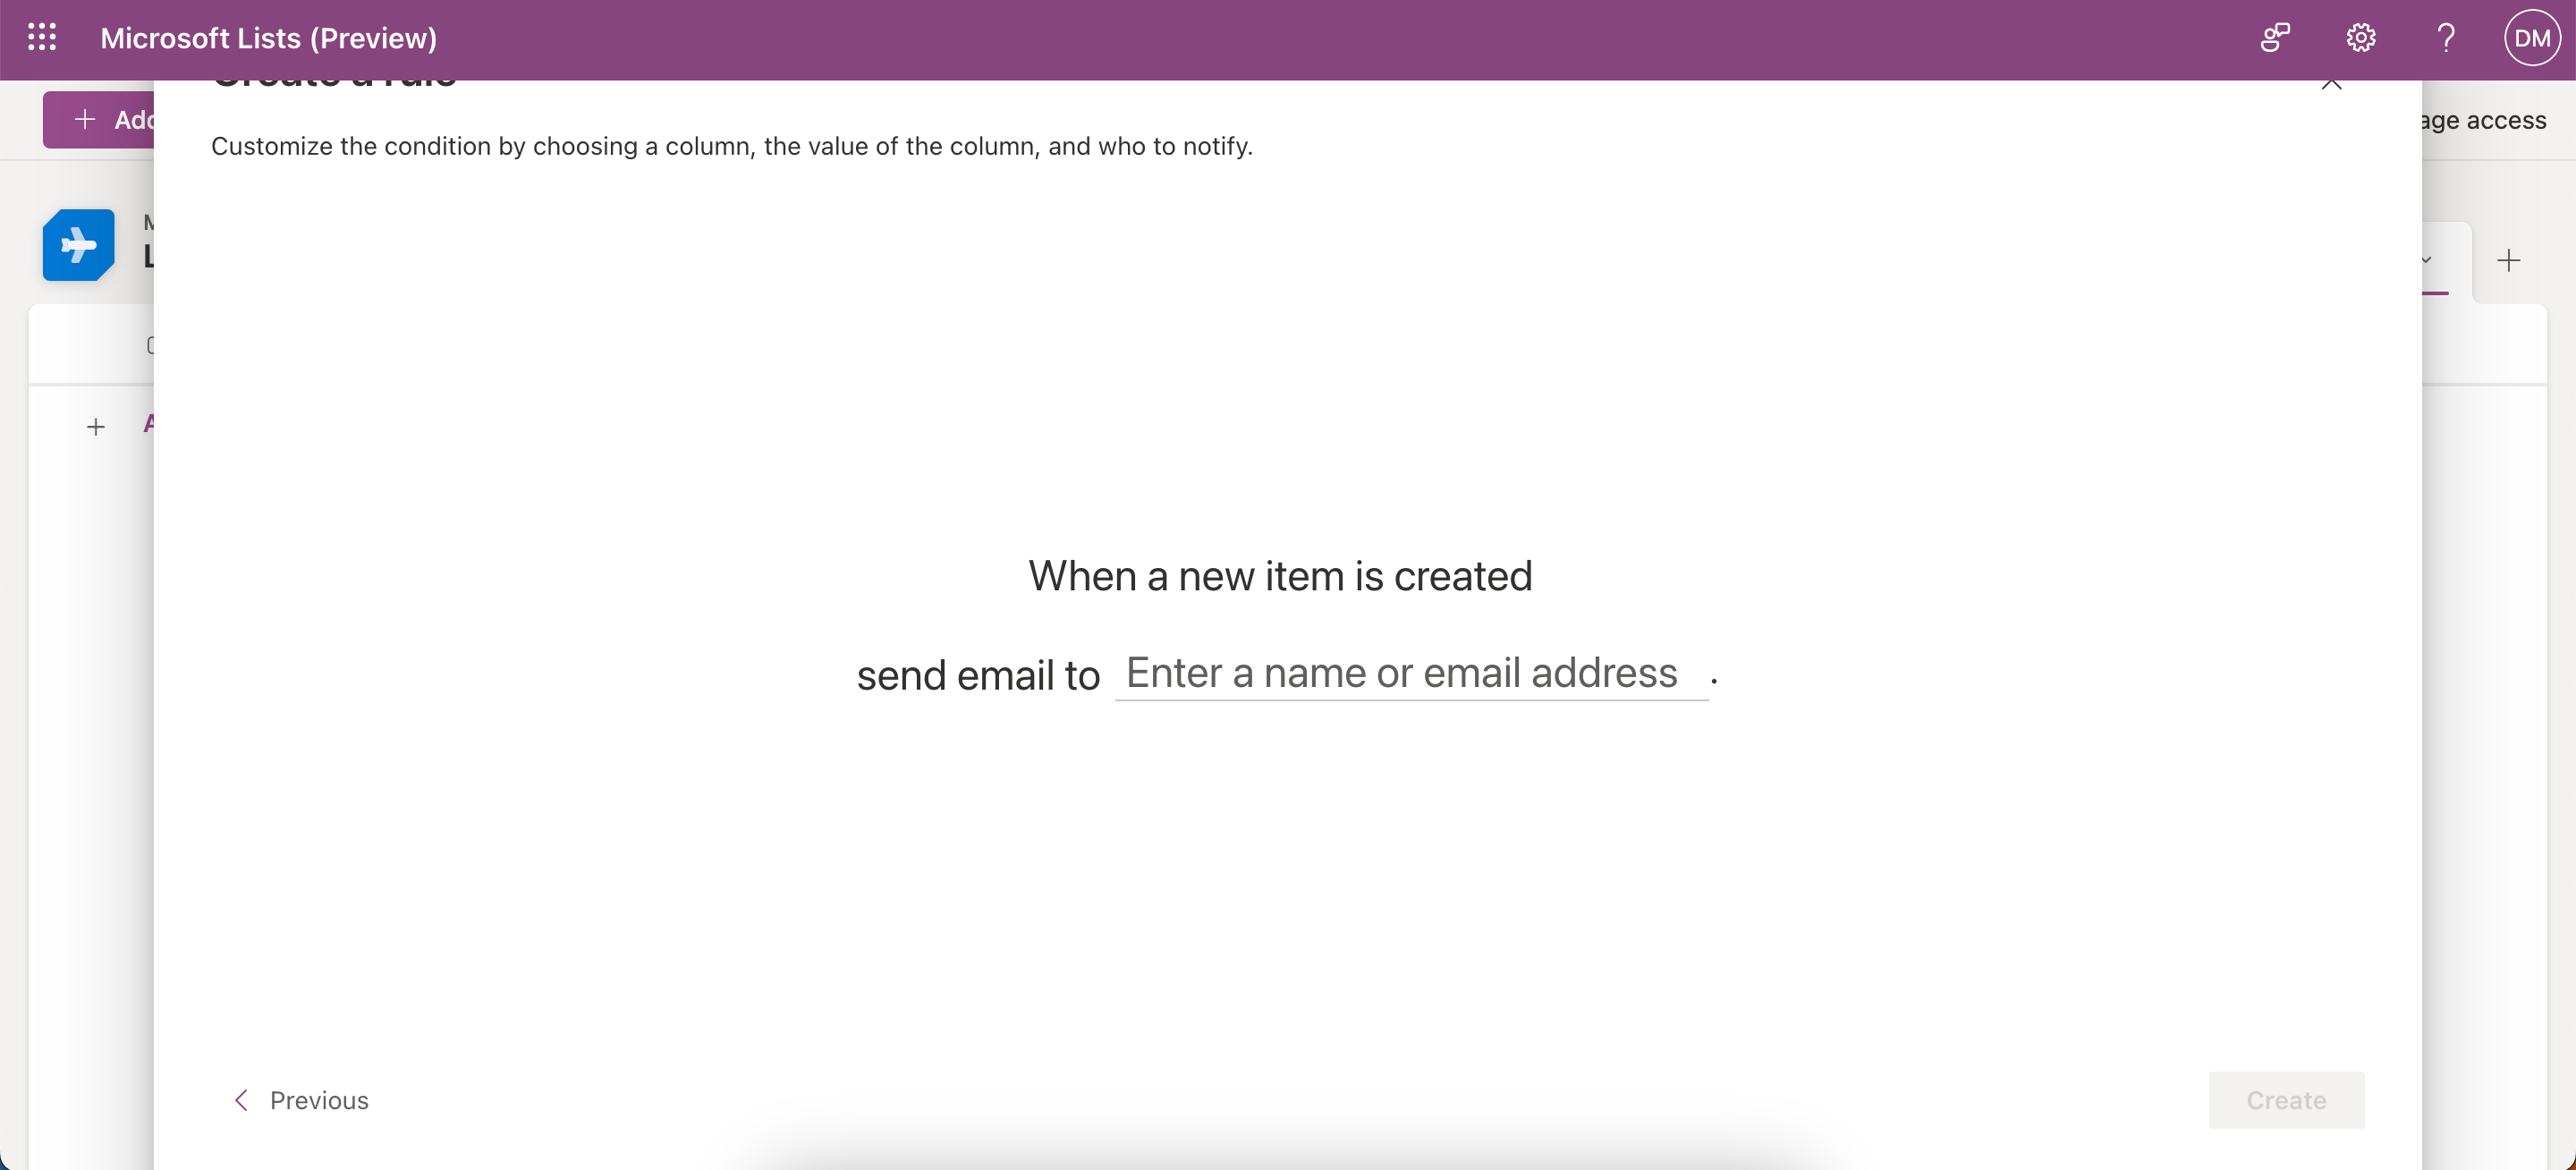 Add Names and Email Addresses to Your List in Microsoft Lists